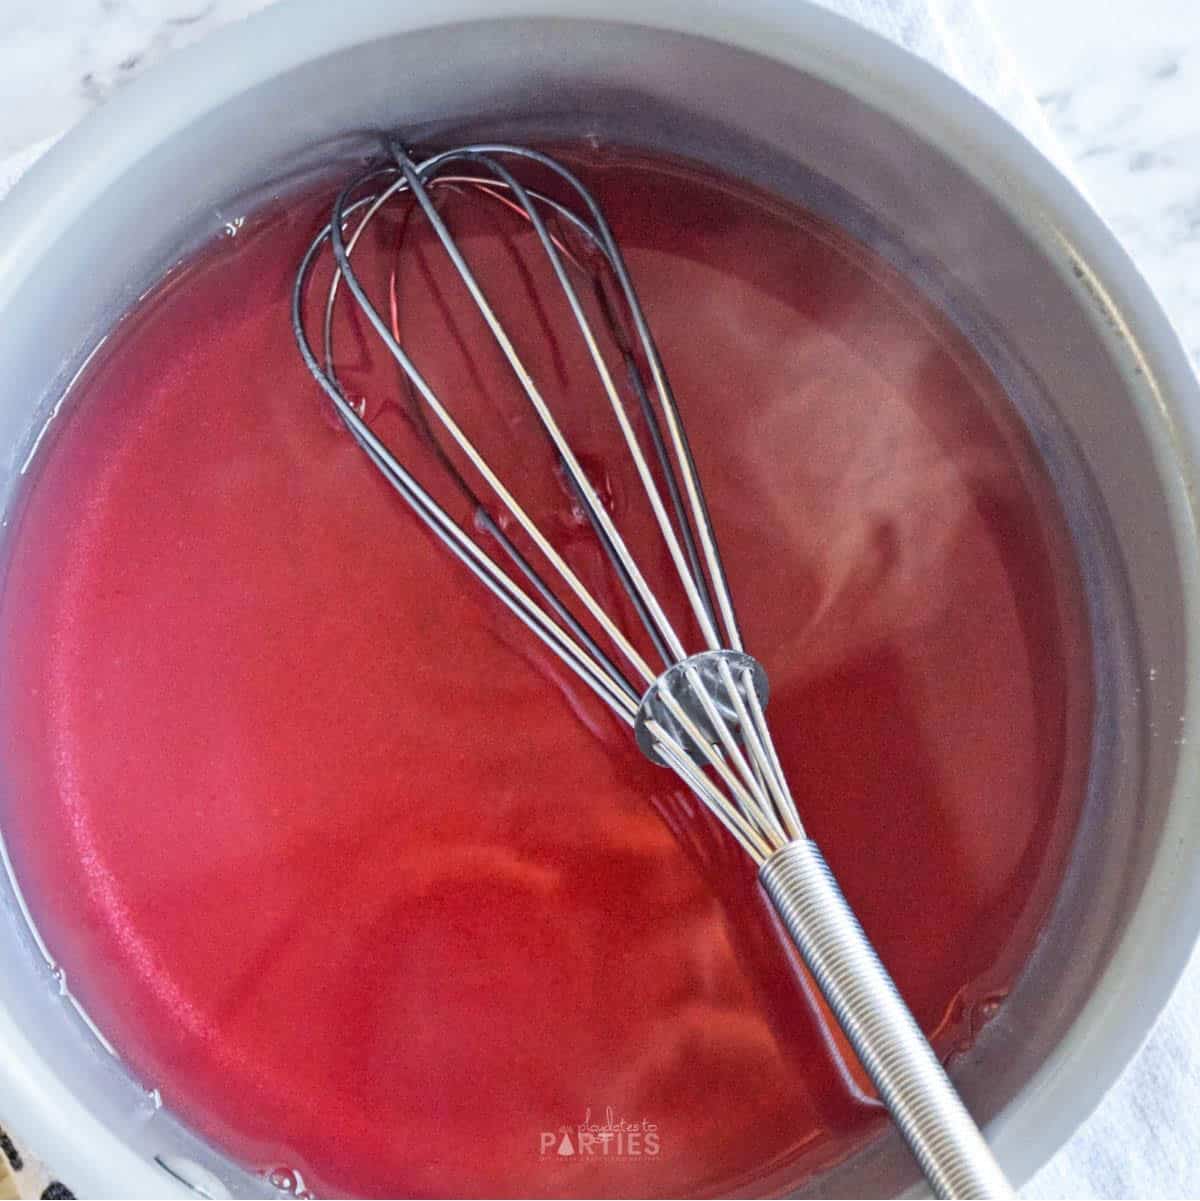 Pink starburst gelatin mixture steaming after boiling water is added.